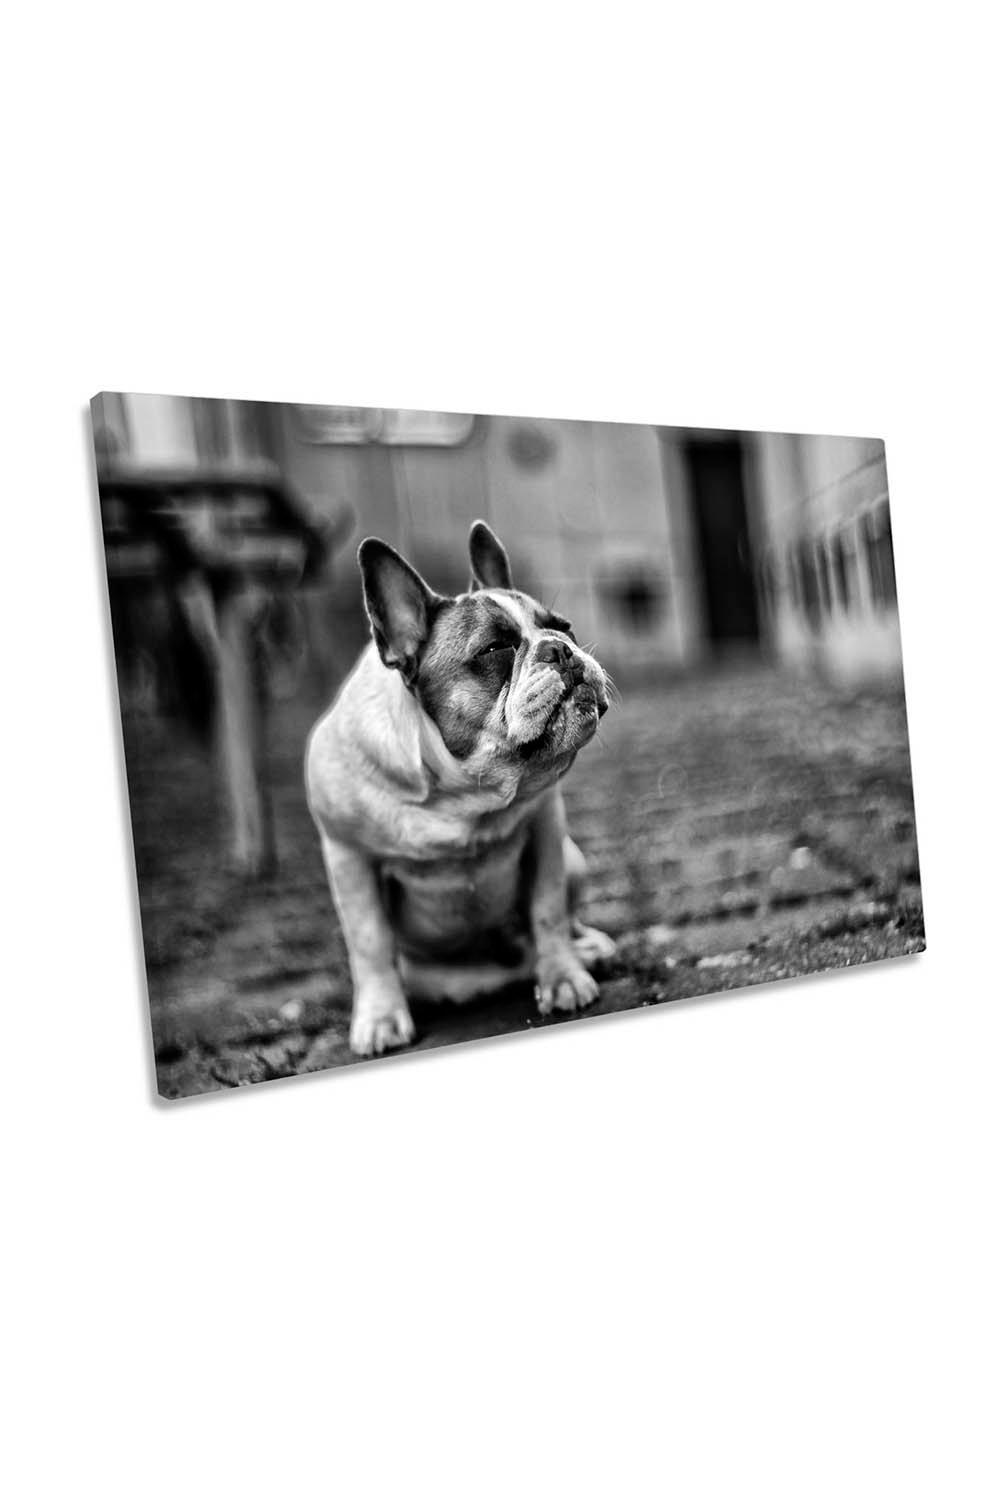 Bulldog Dog Black and White Canvas Wall Art Picture Print